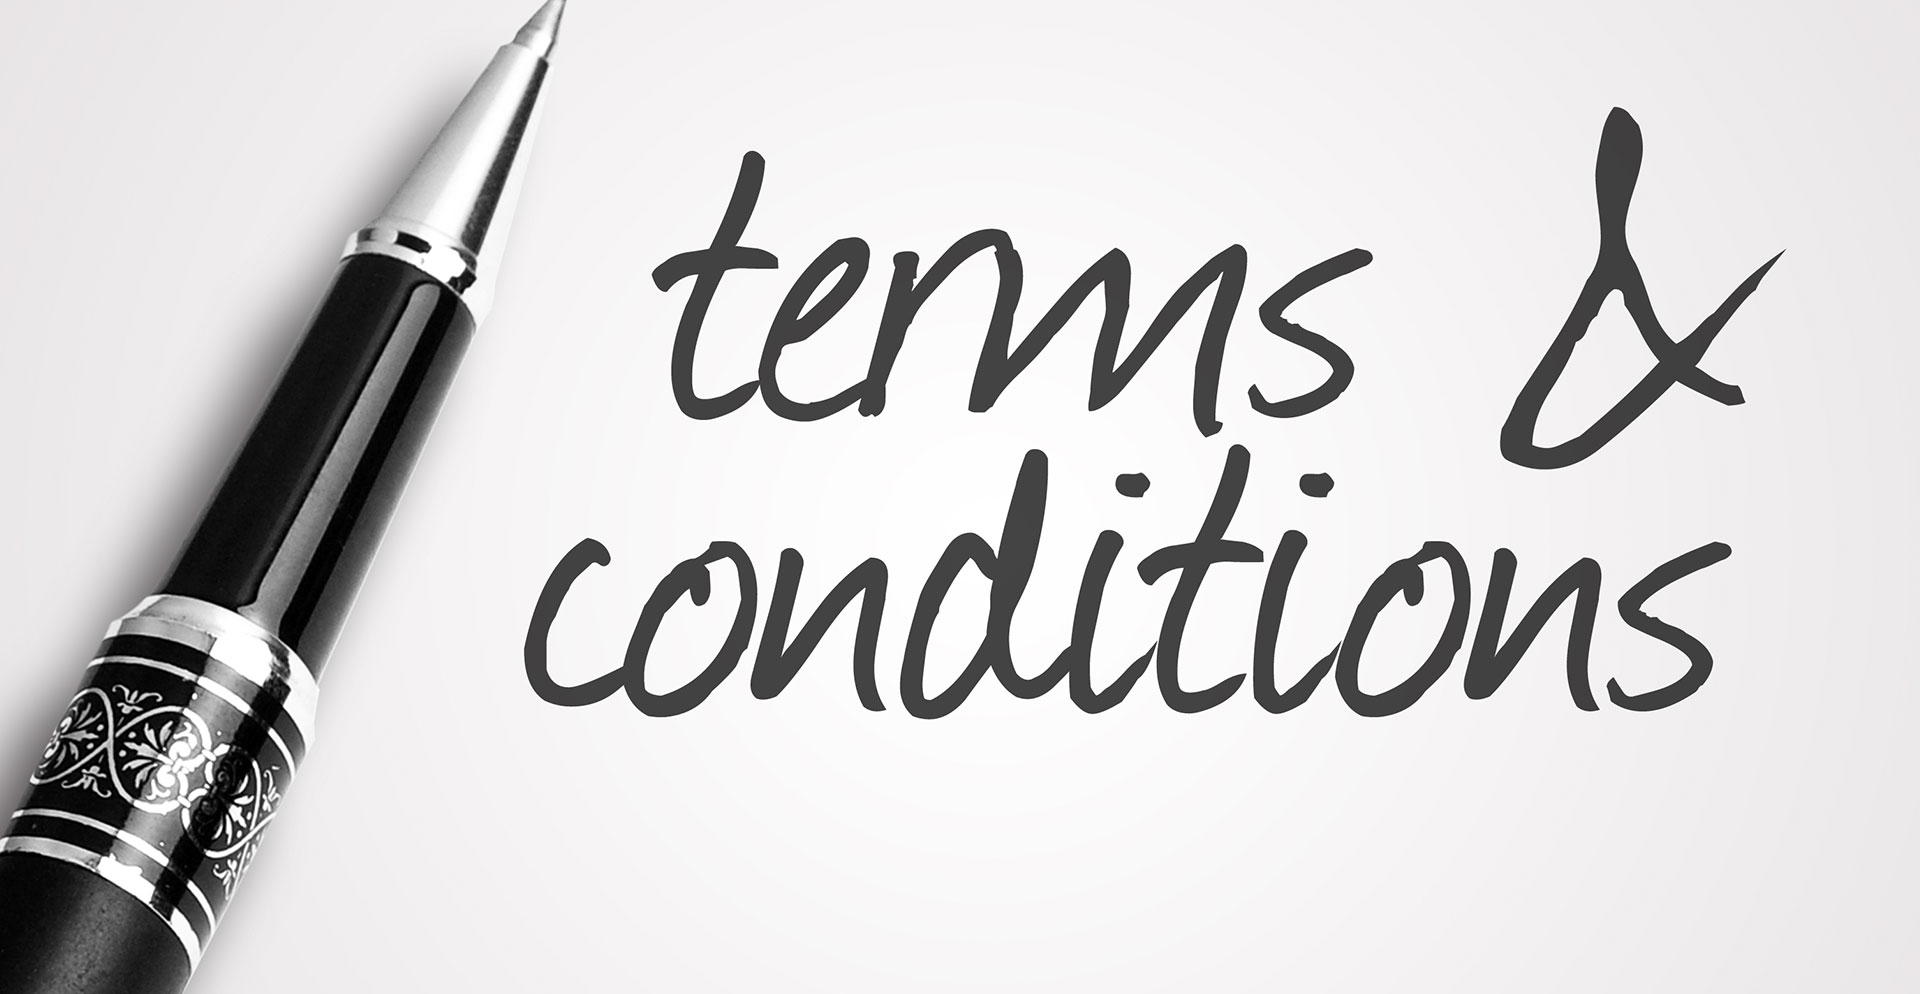 Giveaway Terms and Conditions